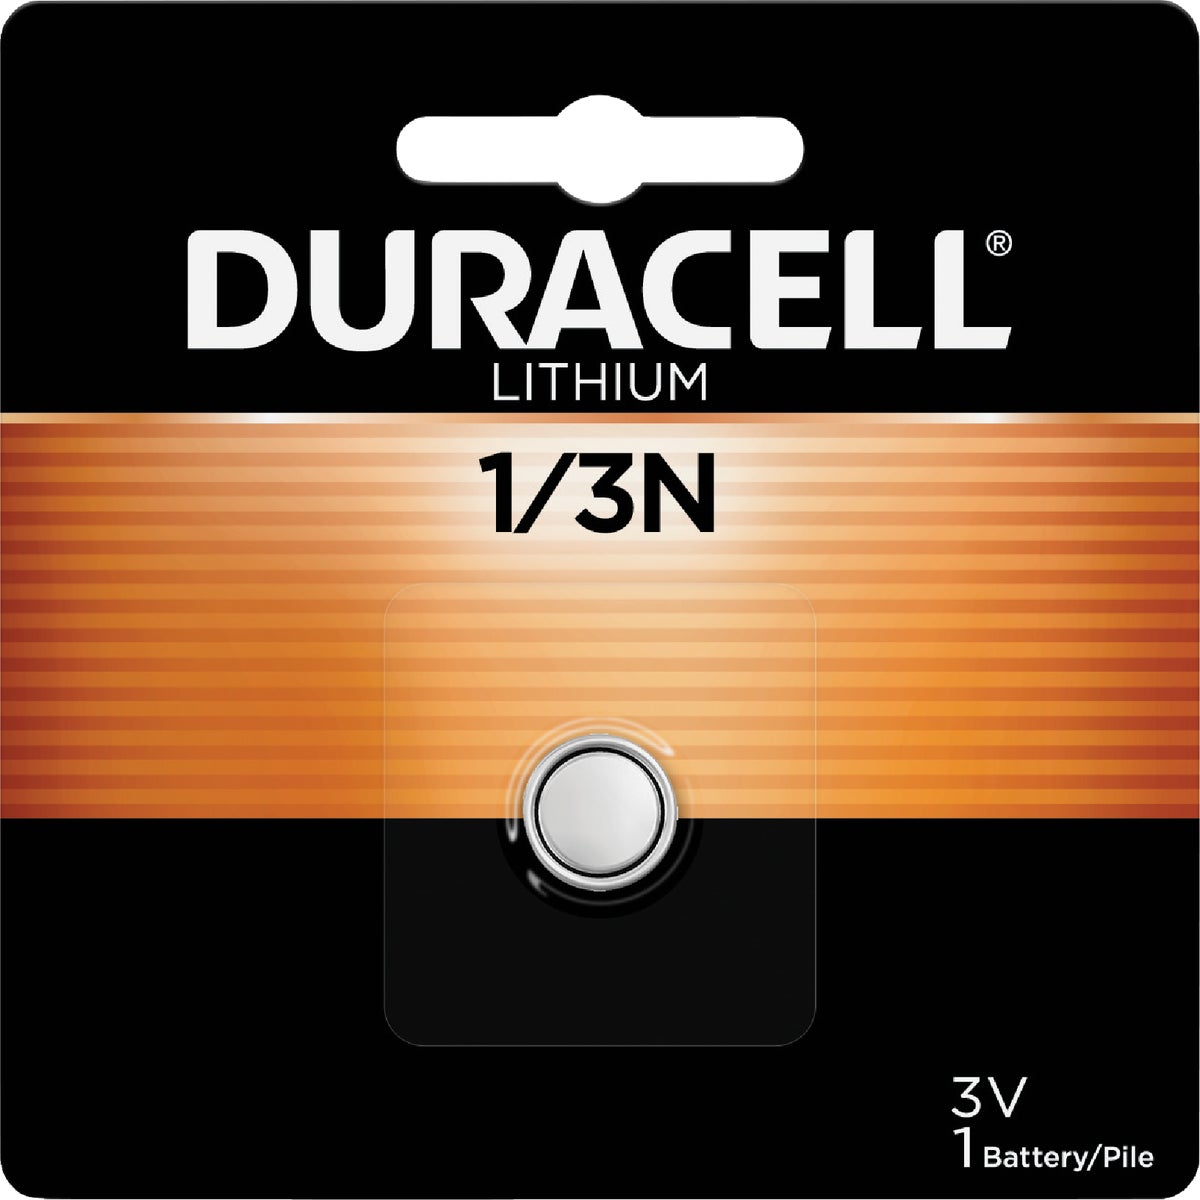 Item 830402, 1/3N lithium battery has Duralock Power Preserve Technology to guarantee 10